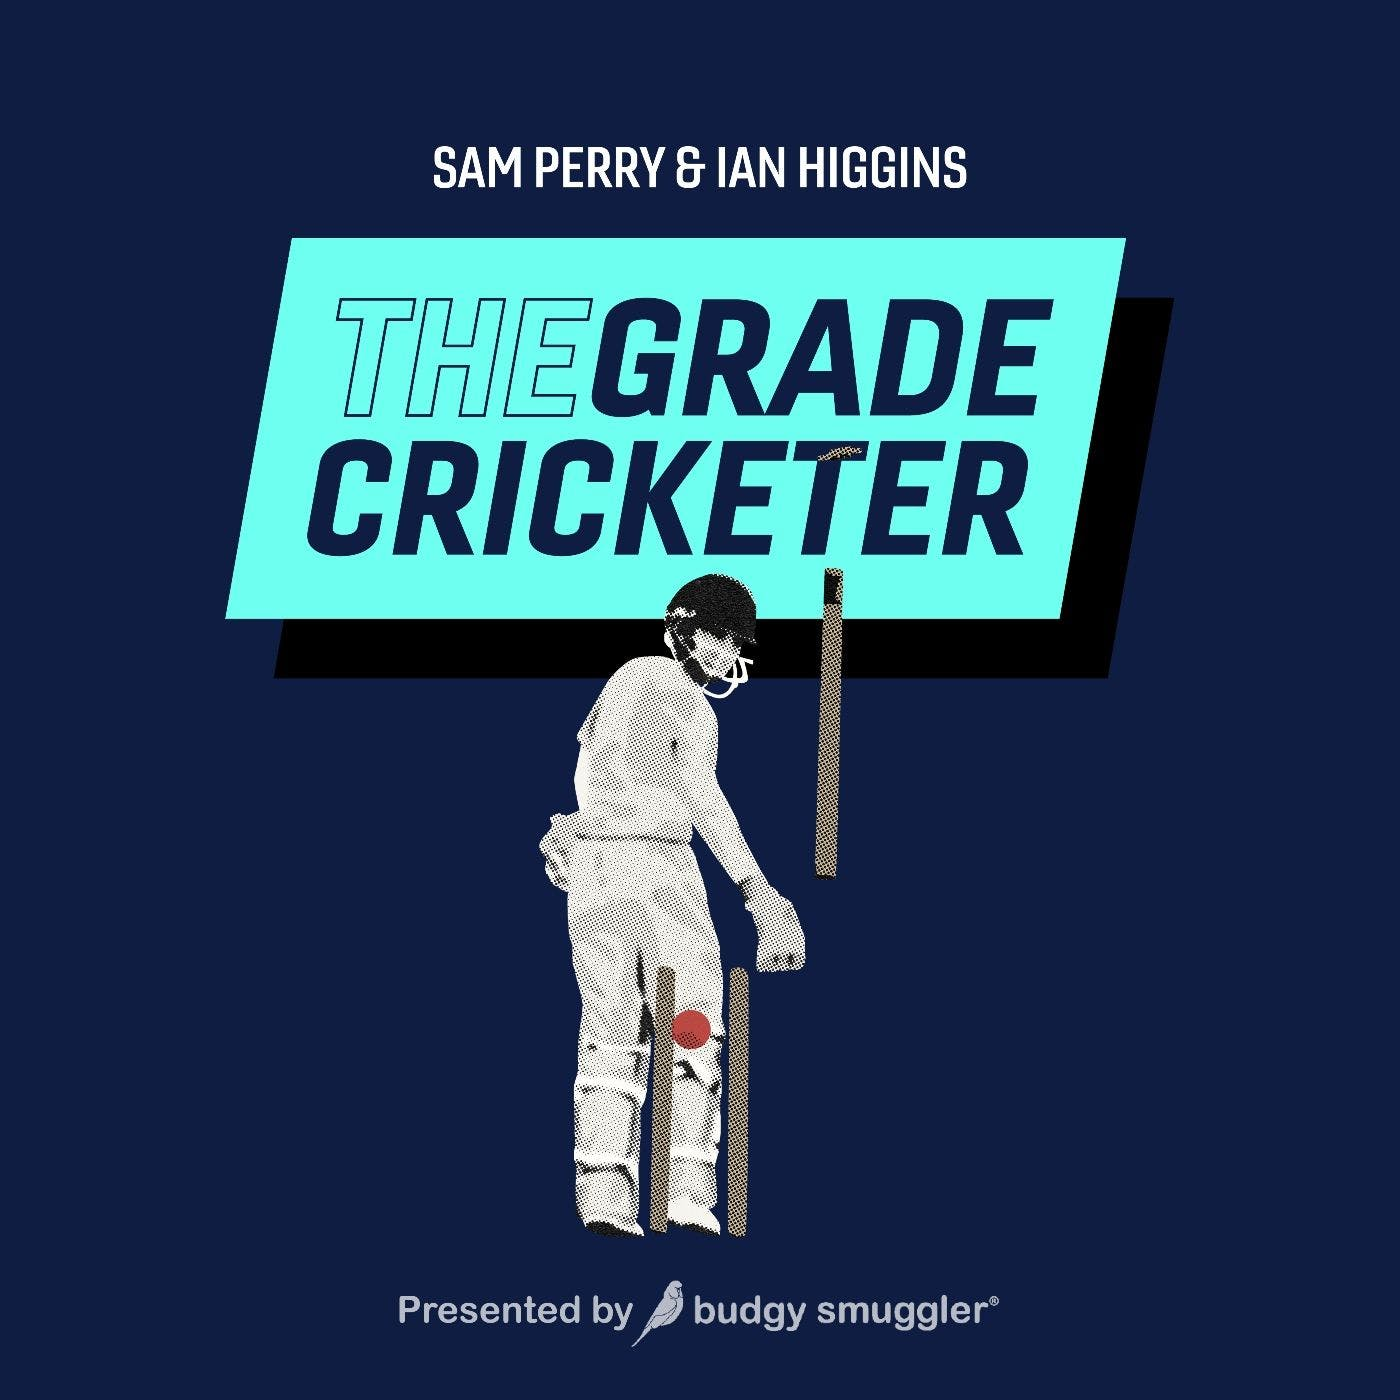 187. Season Finale, with Shane Watson and Chris Rogers